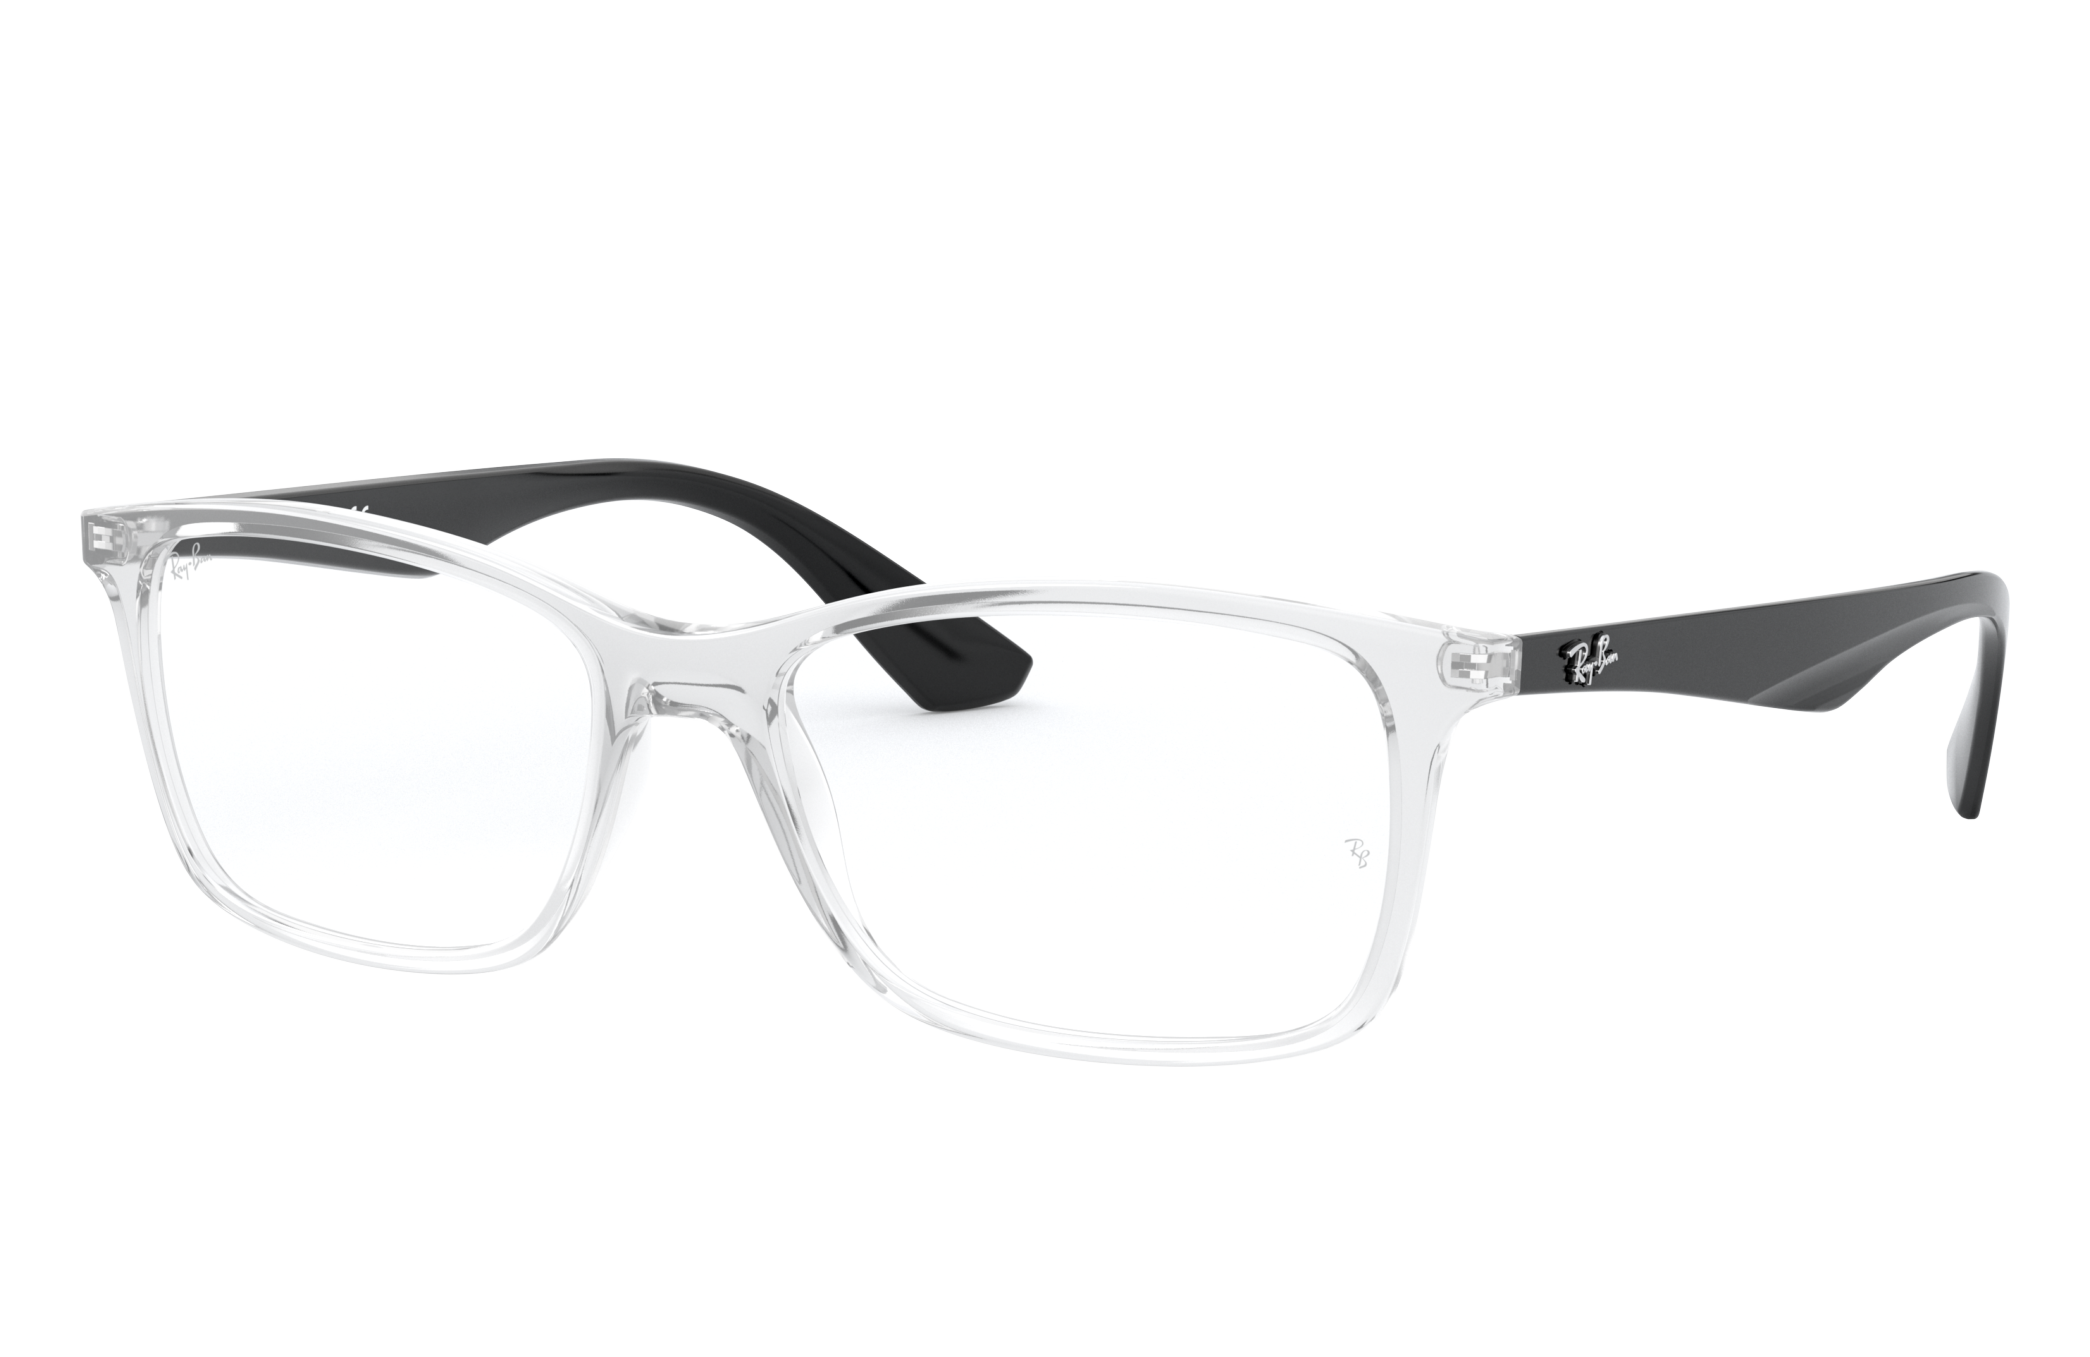 Rb7047 Eyeglasses with Transparent Frame | Ray-Ban®